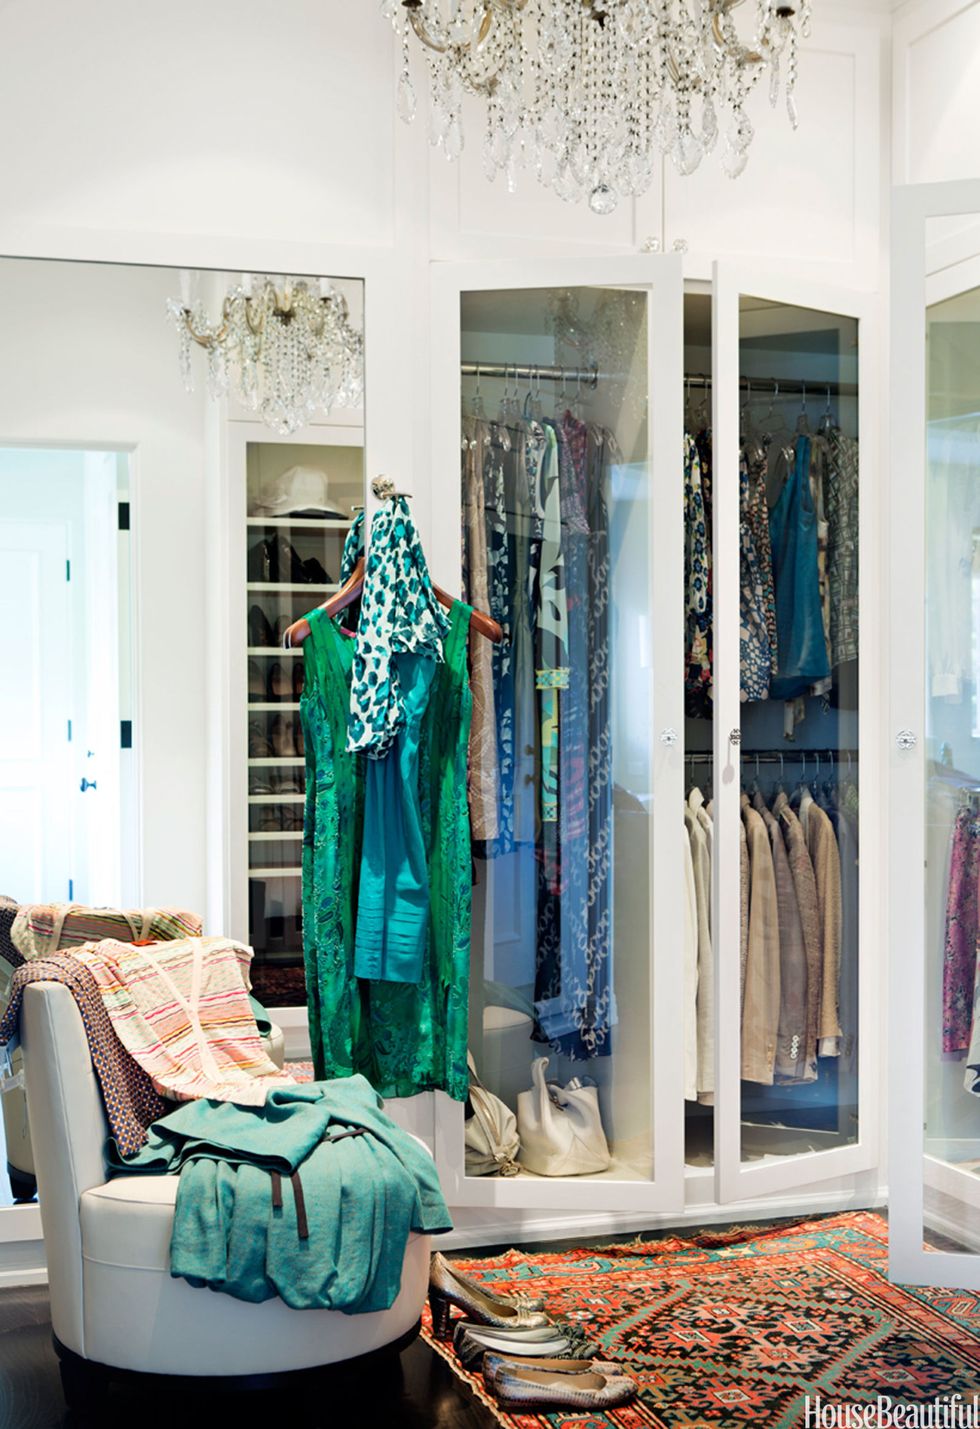 35 Chic Walk-In Closet Ideas From the AD Archive